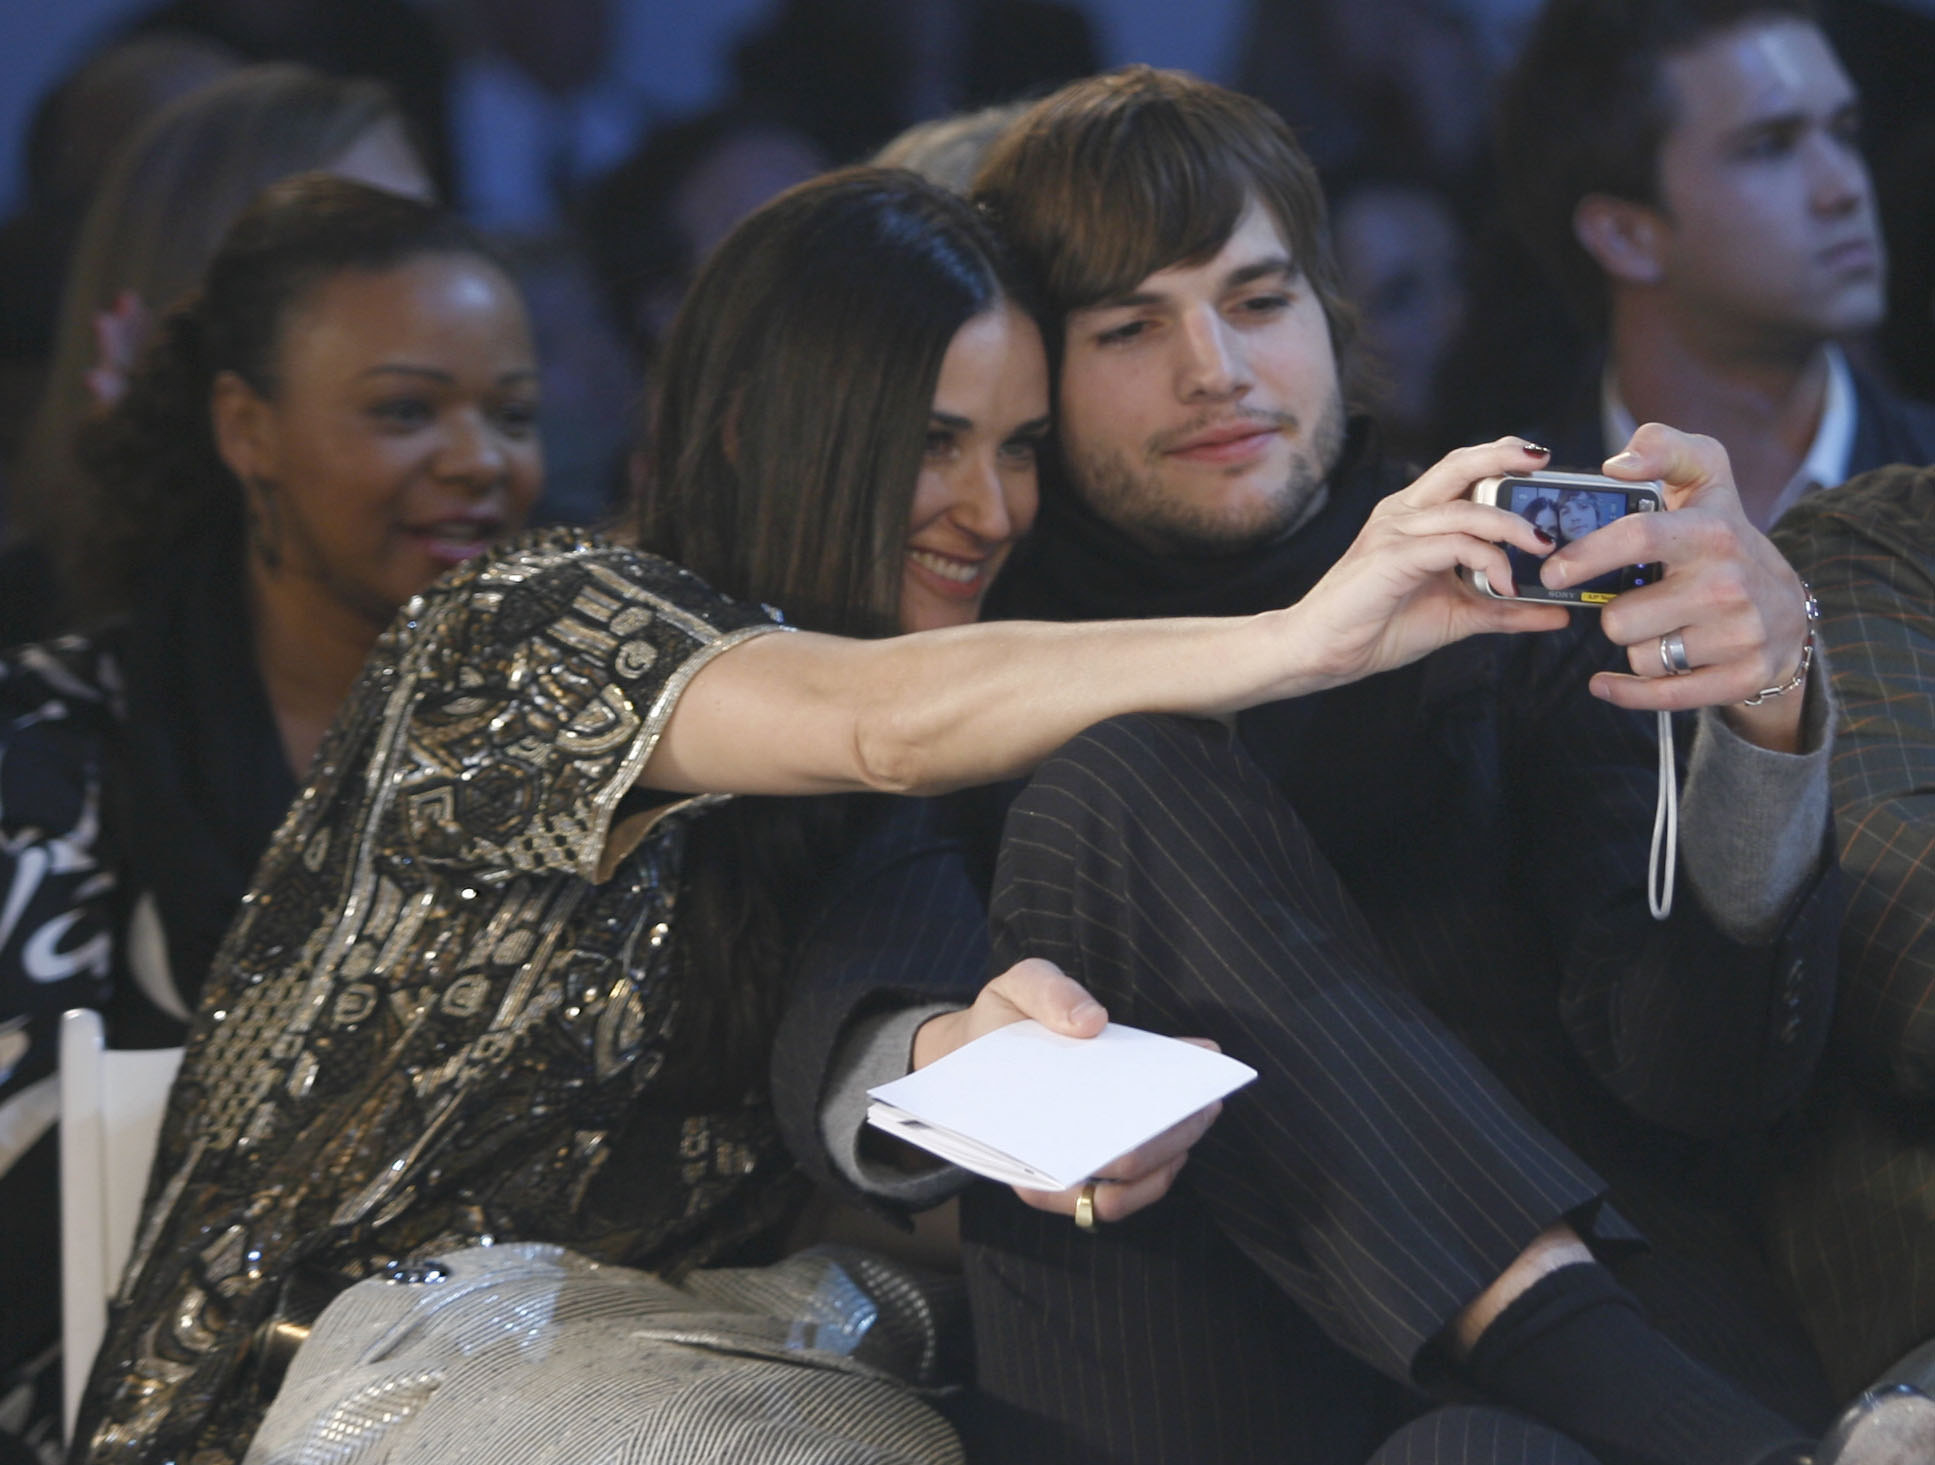 Demi Moore and Ashton Kutcher sit together and pose for a selfie